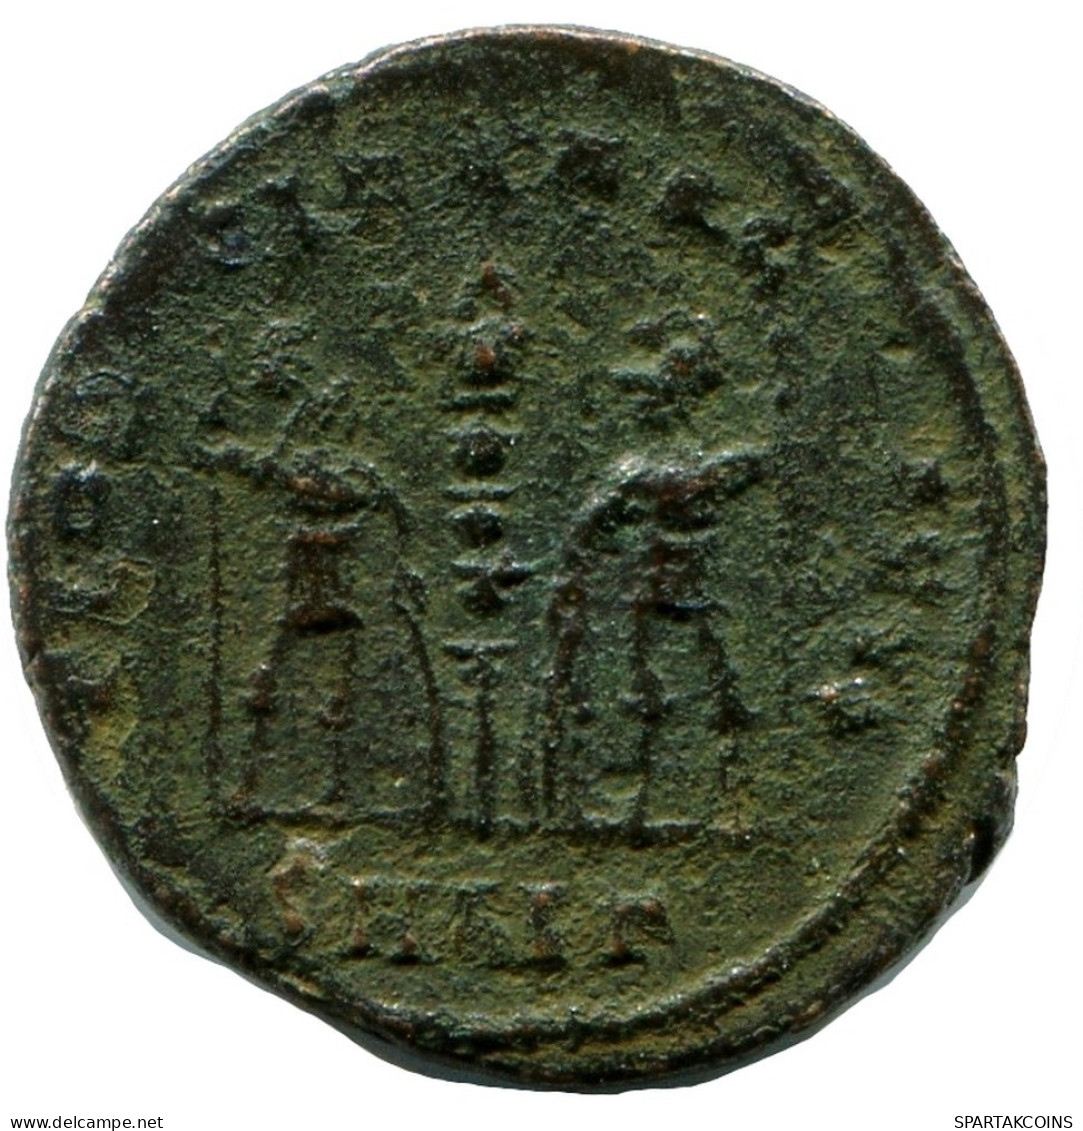 CONSTANS MINTED IN ALEKSANDRIA FROM THE ROYAL ONTARIO MUSEUM #ANC11363.14.U.A - L'Empire Chrétien (307 à 363)